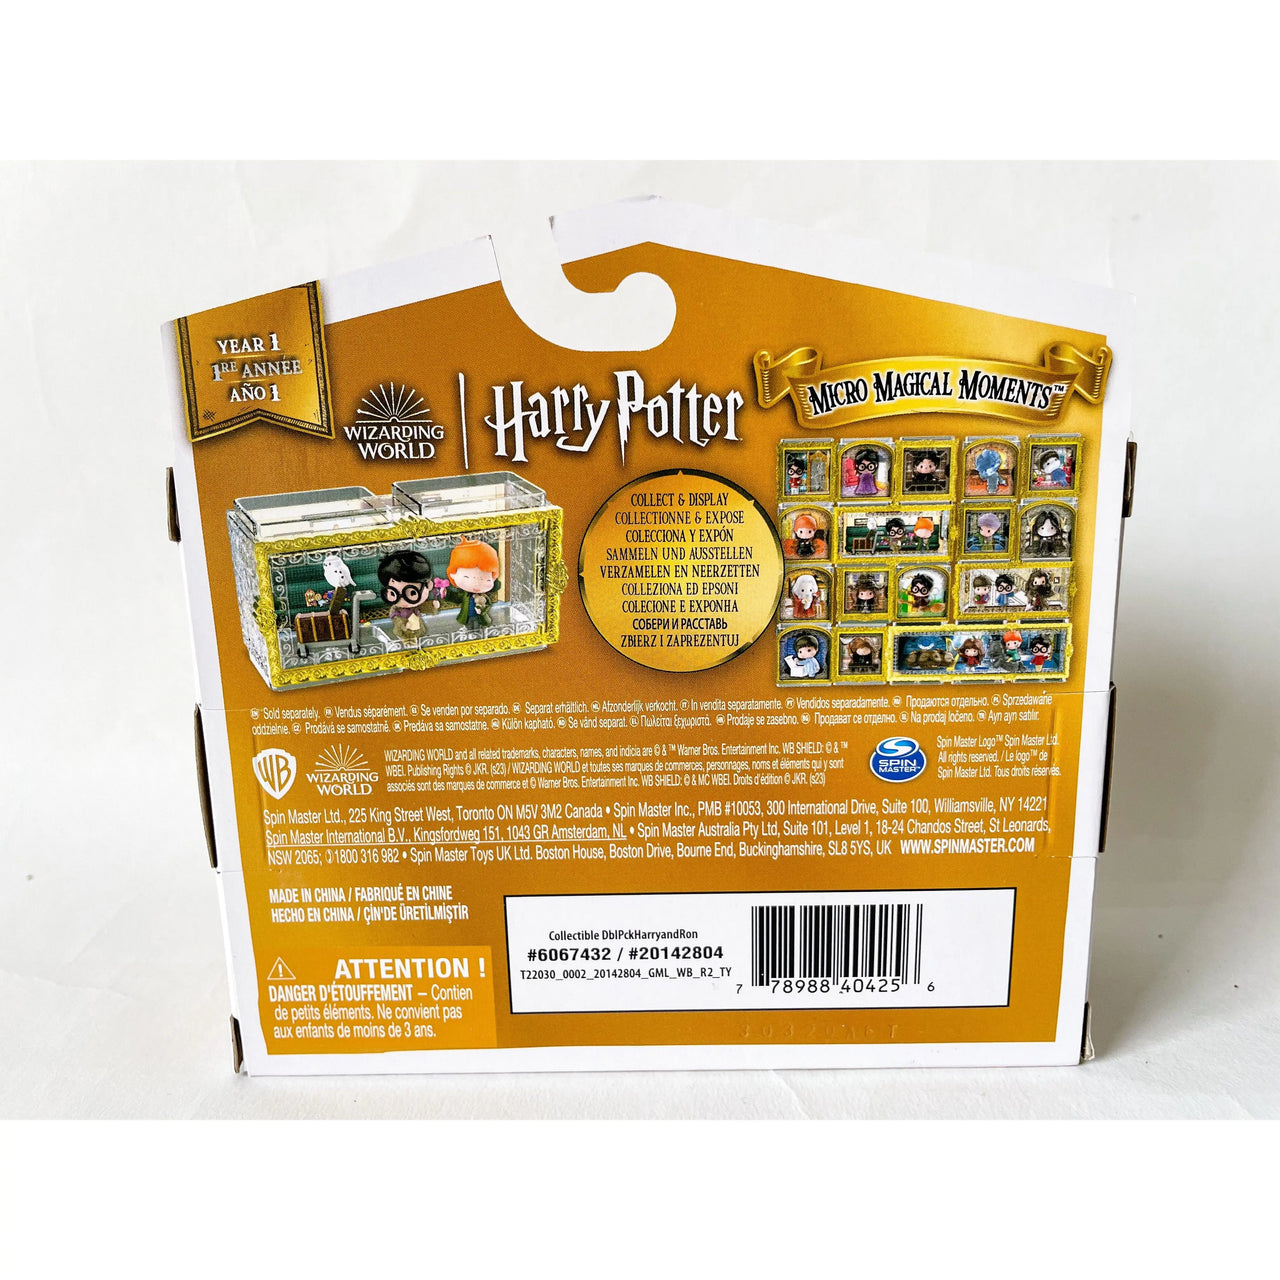 Wizarding World Micro Magical Moments - Hedwig Harry Ron Harry Potter